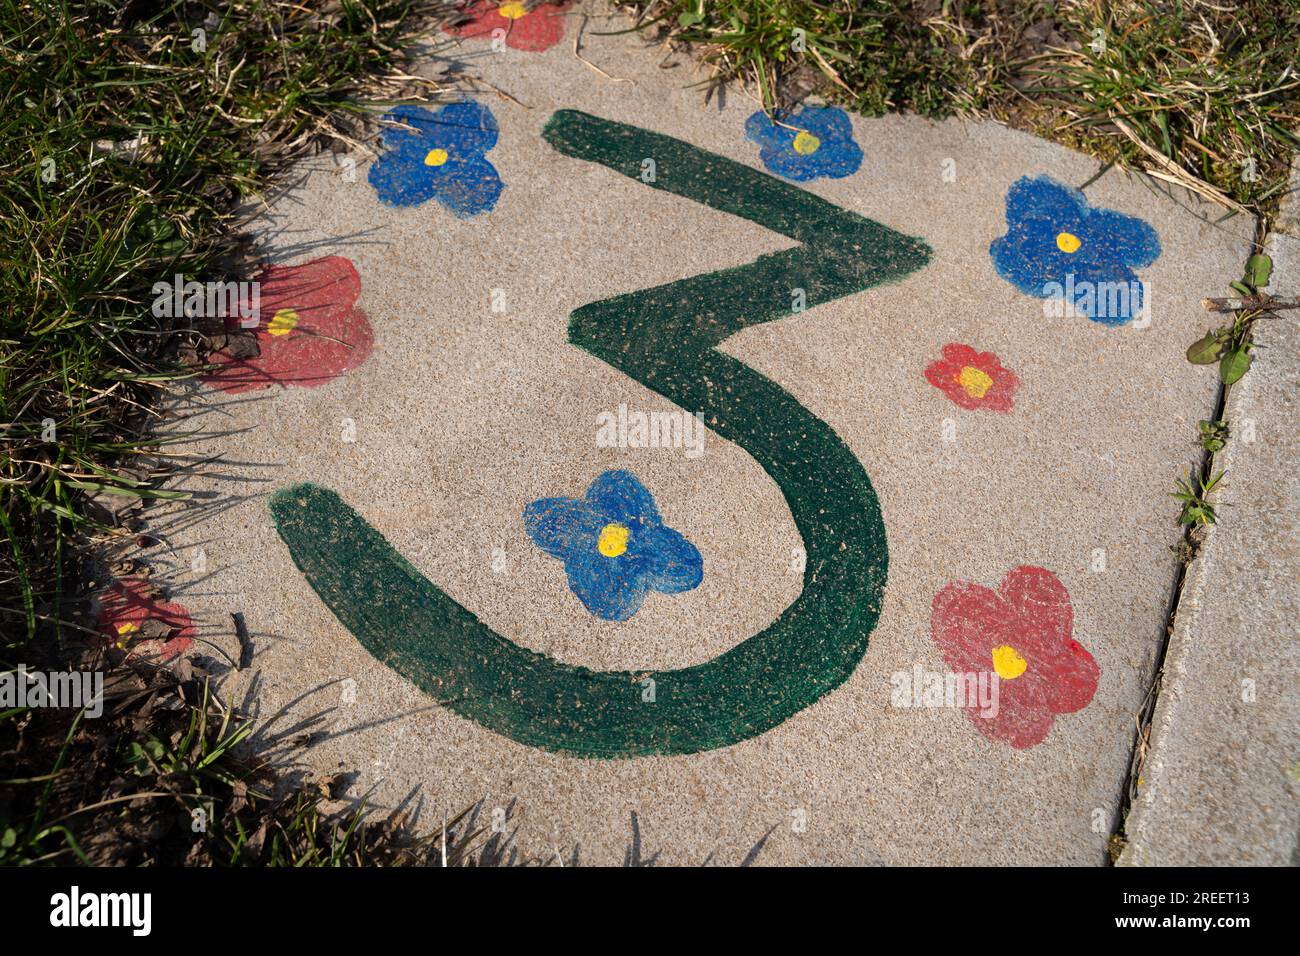 Hopscotch game painted by children on the playground with a green number 3 and coloful flowers Stock Photo